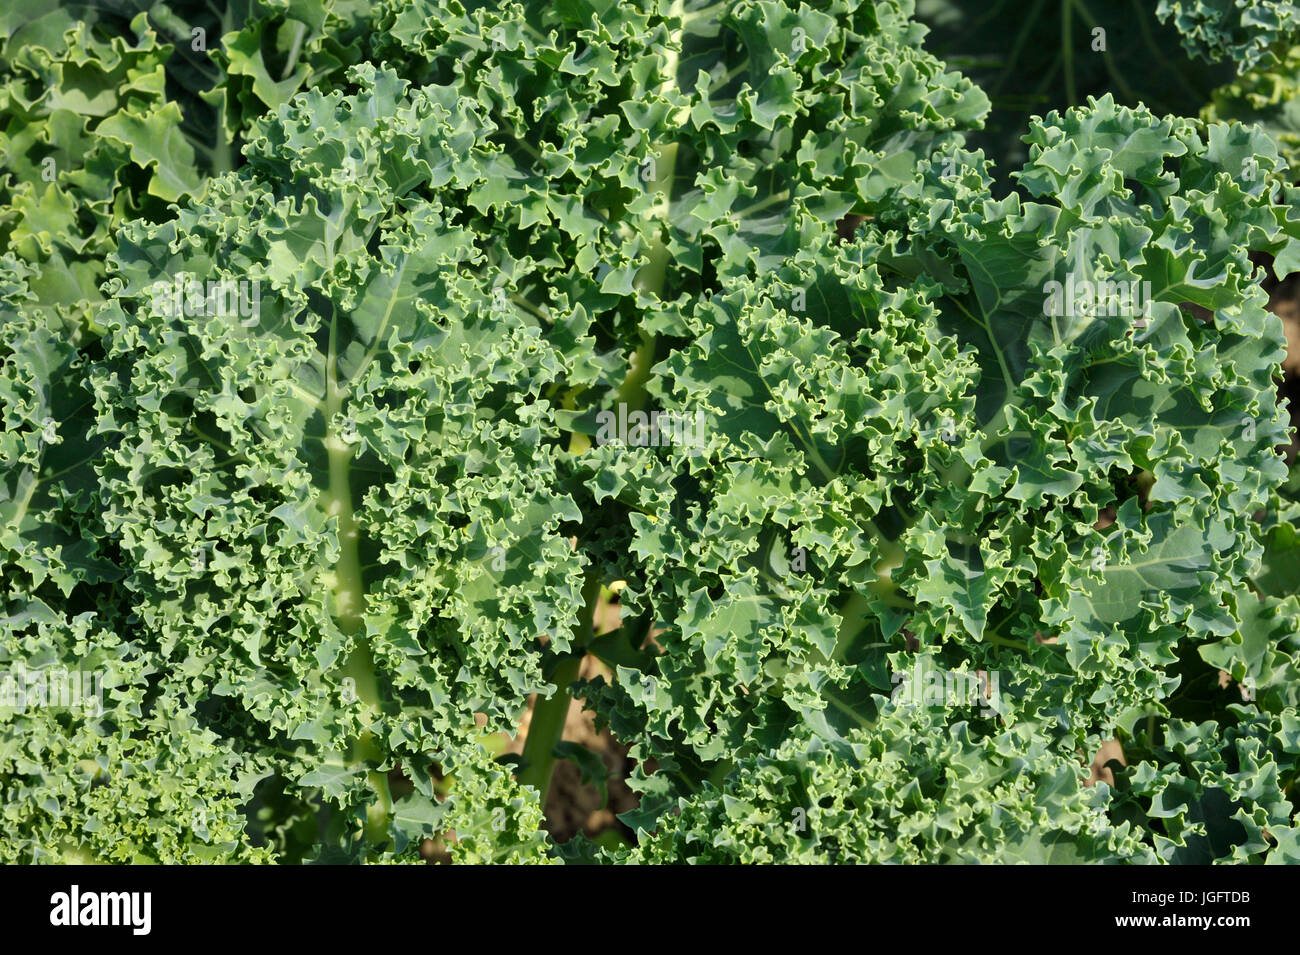 Curly Kale a crinkly cabbage, loose leaves form a rosette as the plants grow and and is often called a superfood. Stock Photo